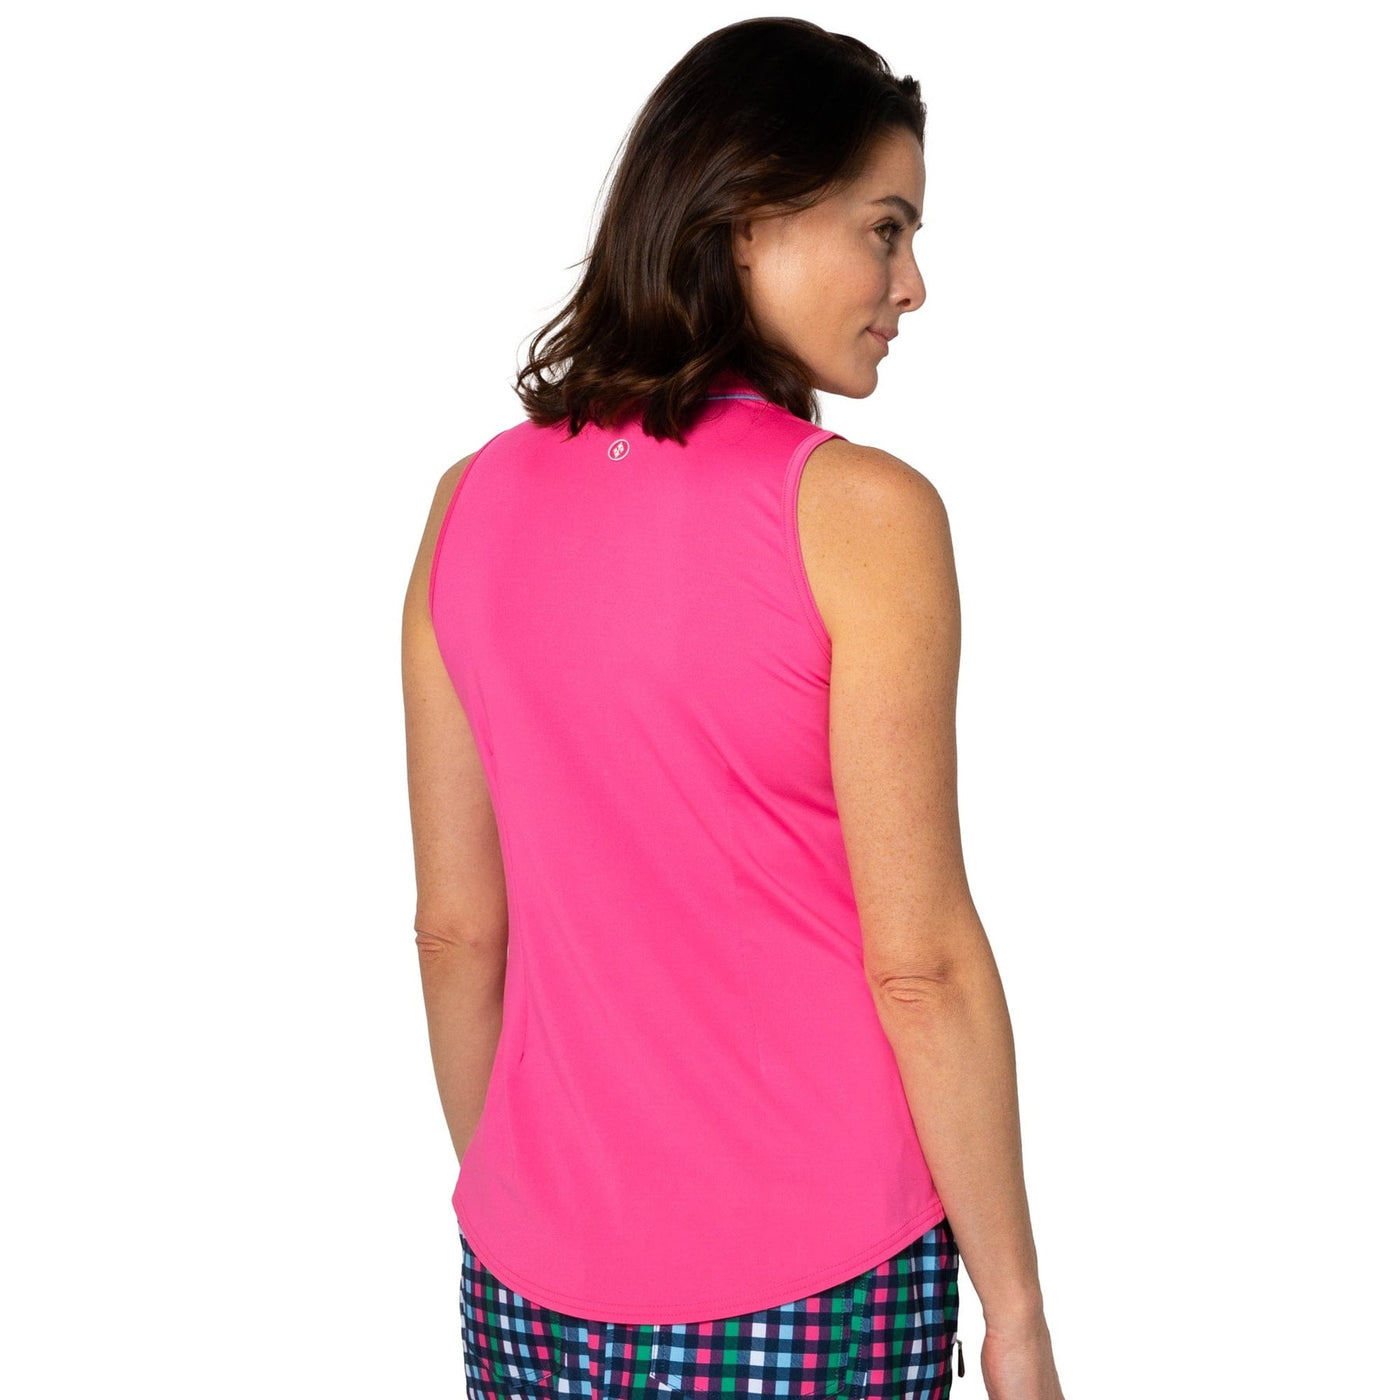 Jofit- Sleeveless Cutaway Tipsy Top Candy Pink (Style#: GT0069-CDY)